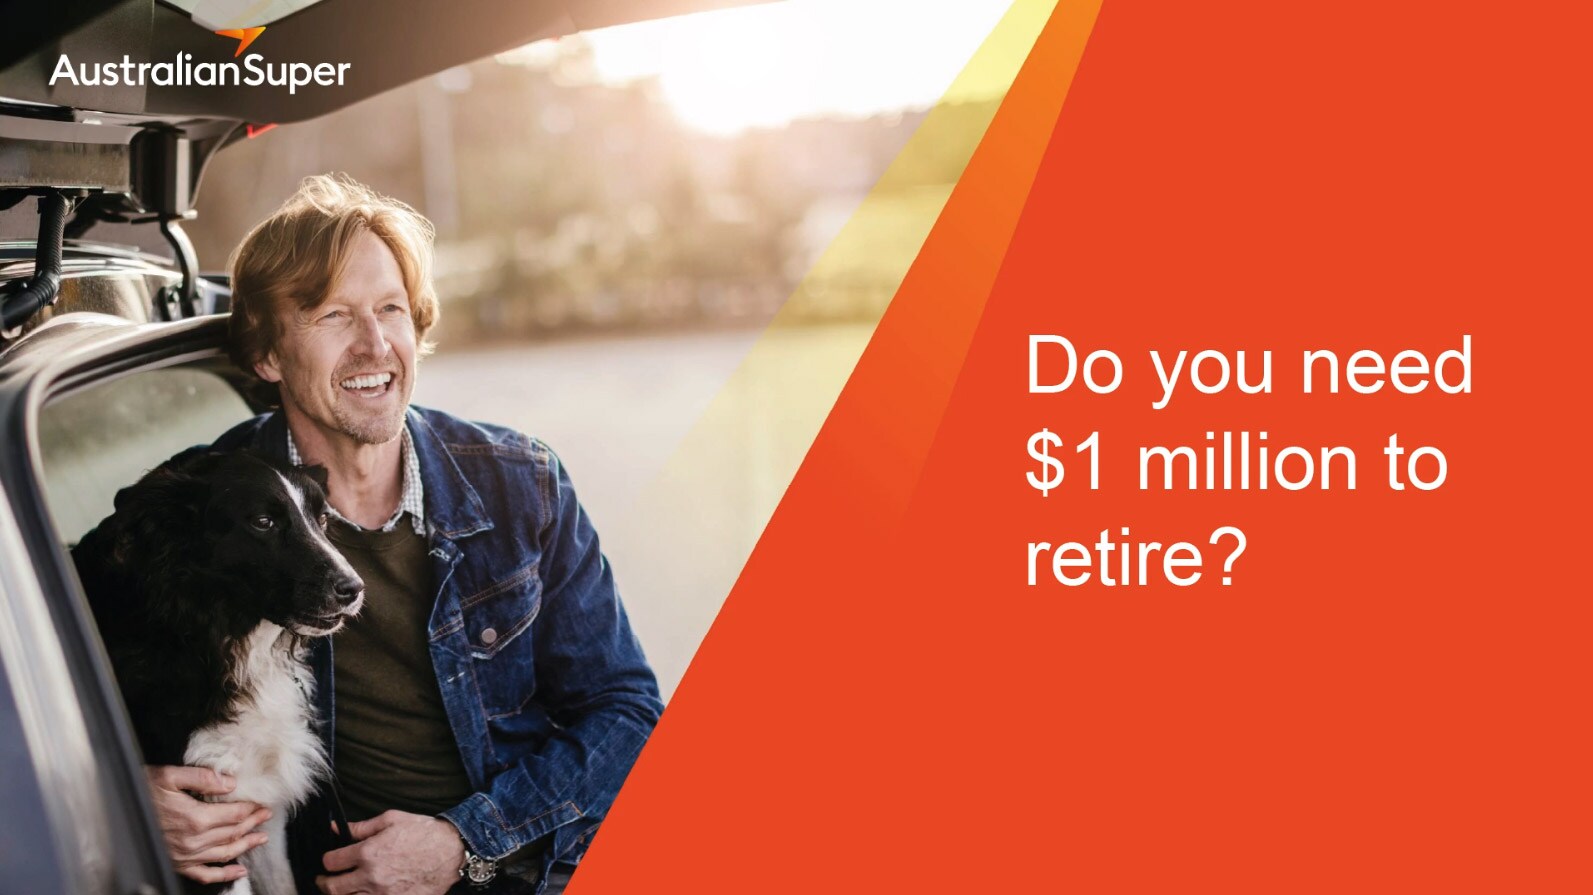 Do you need $1 million to retire?